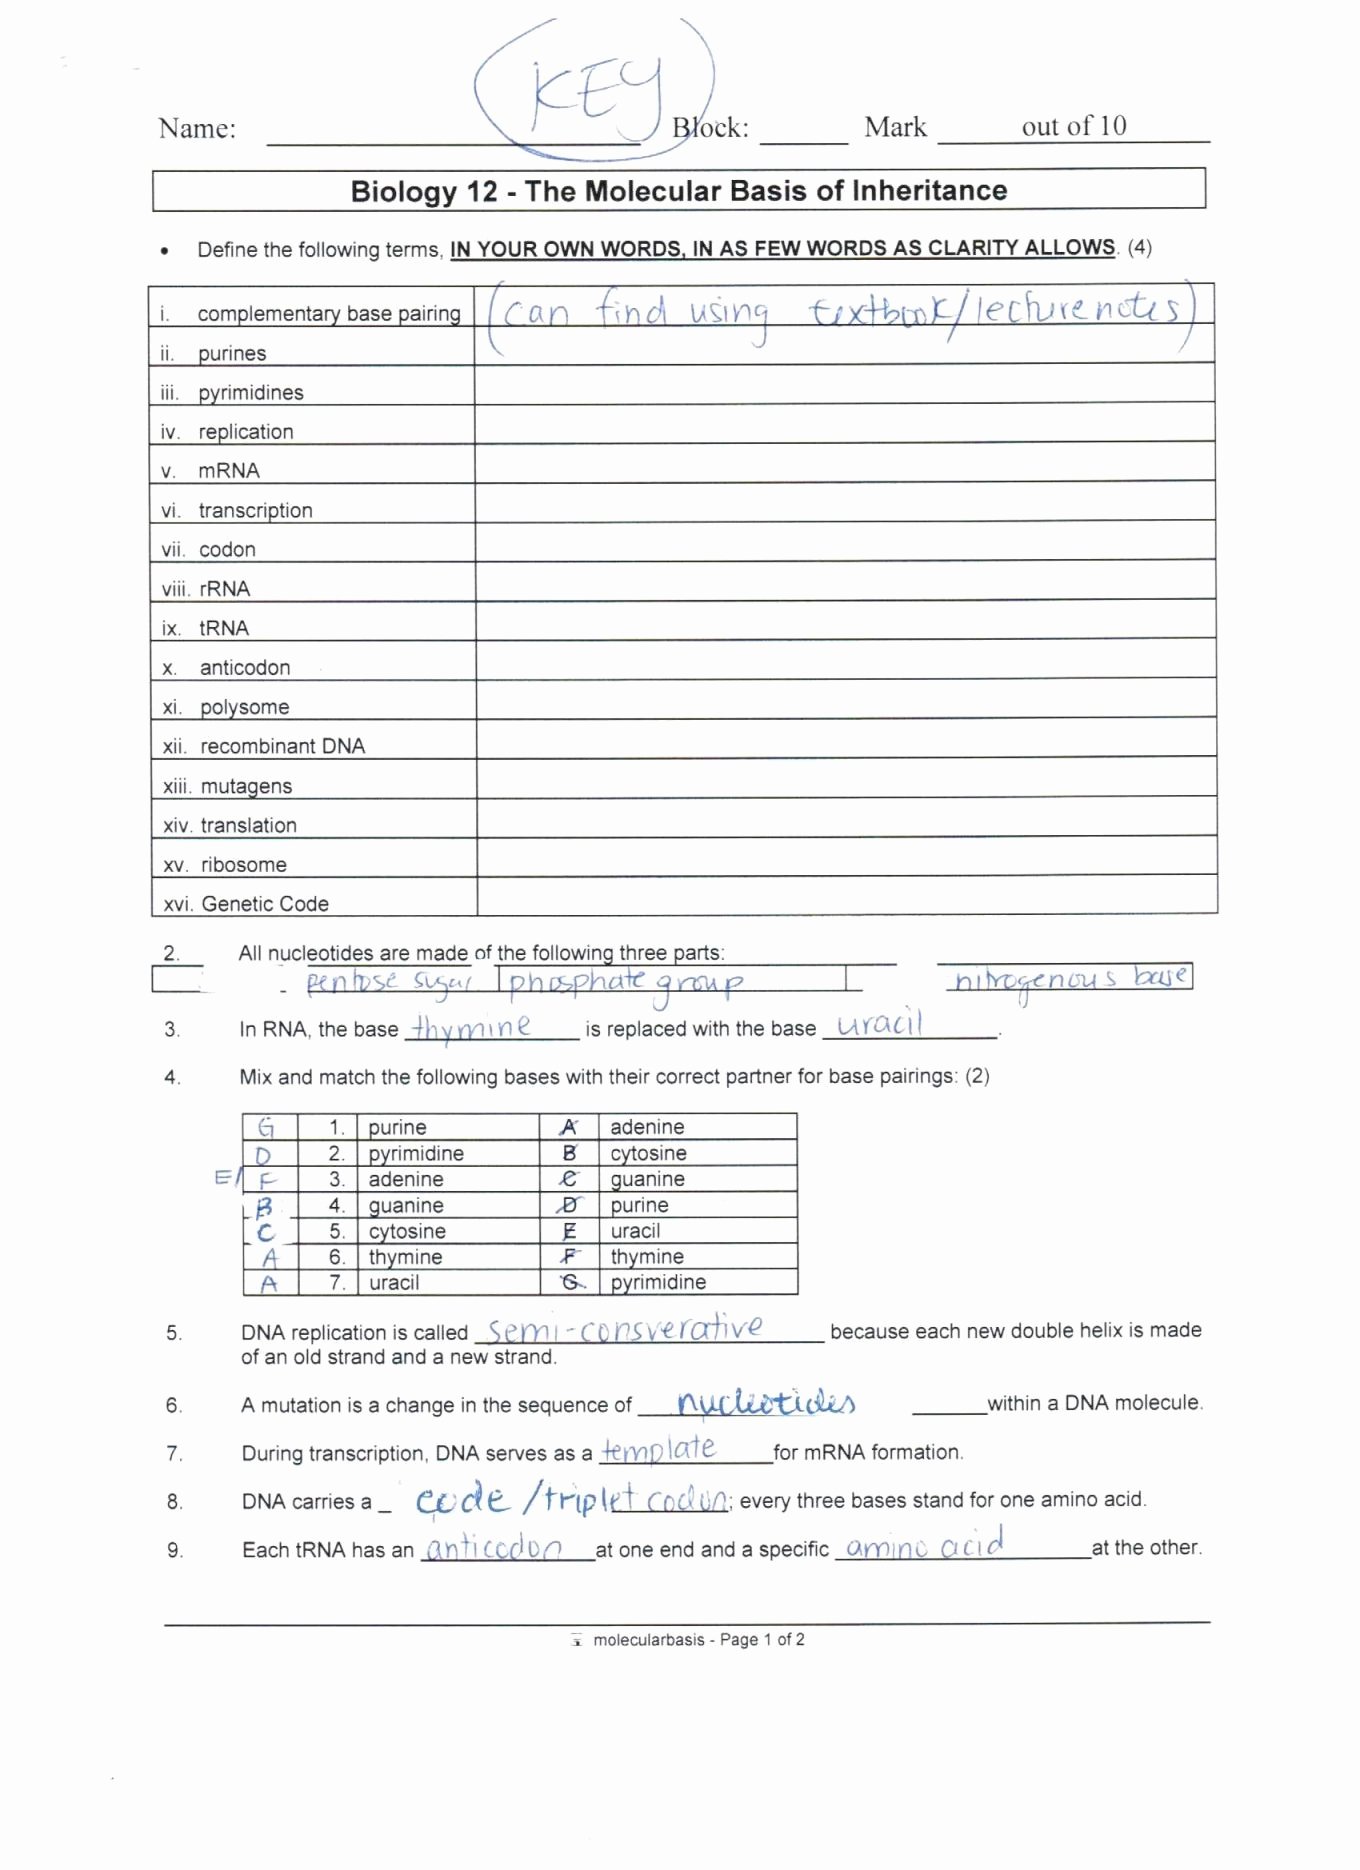 Dna Mutations Practice Worksheet Answers Beautiful Dna Mutations Practice Worksheet Conclusion Answers